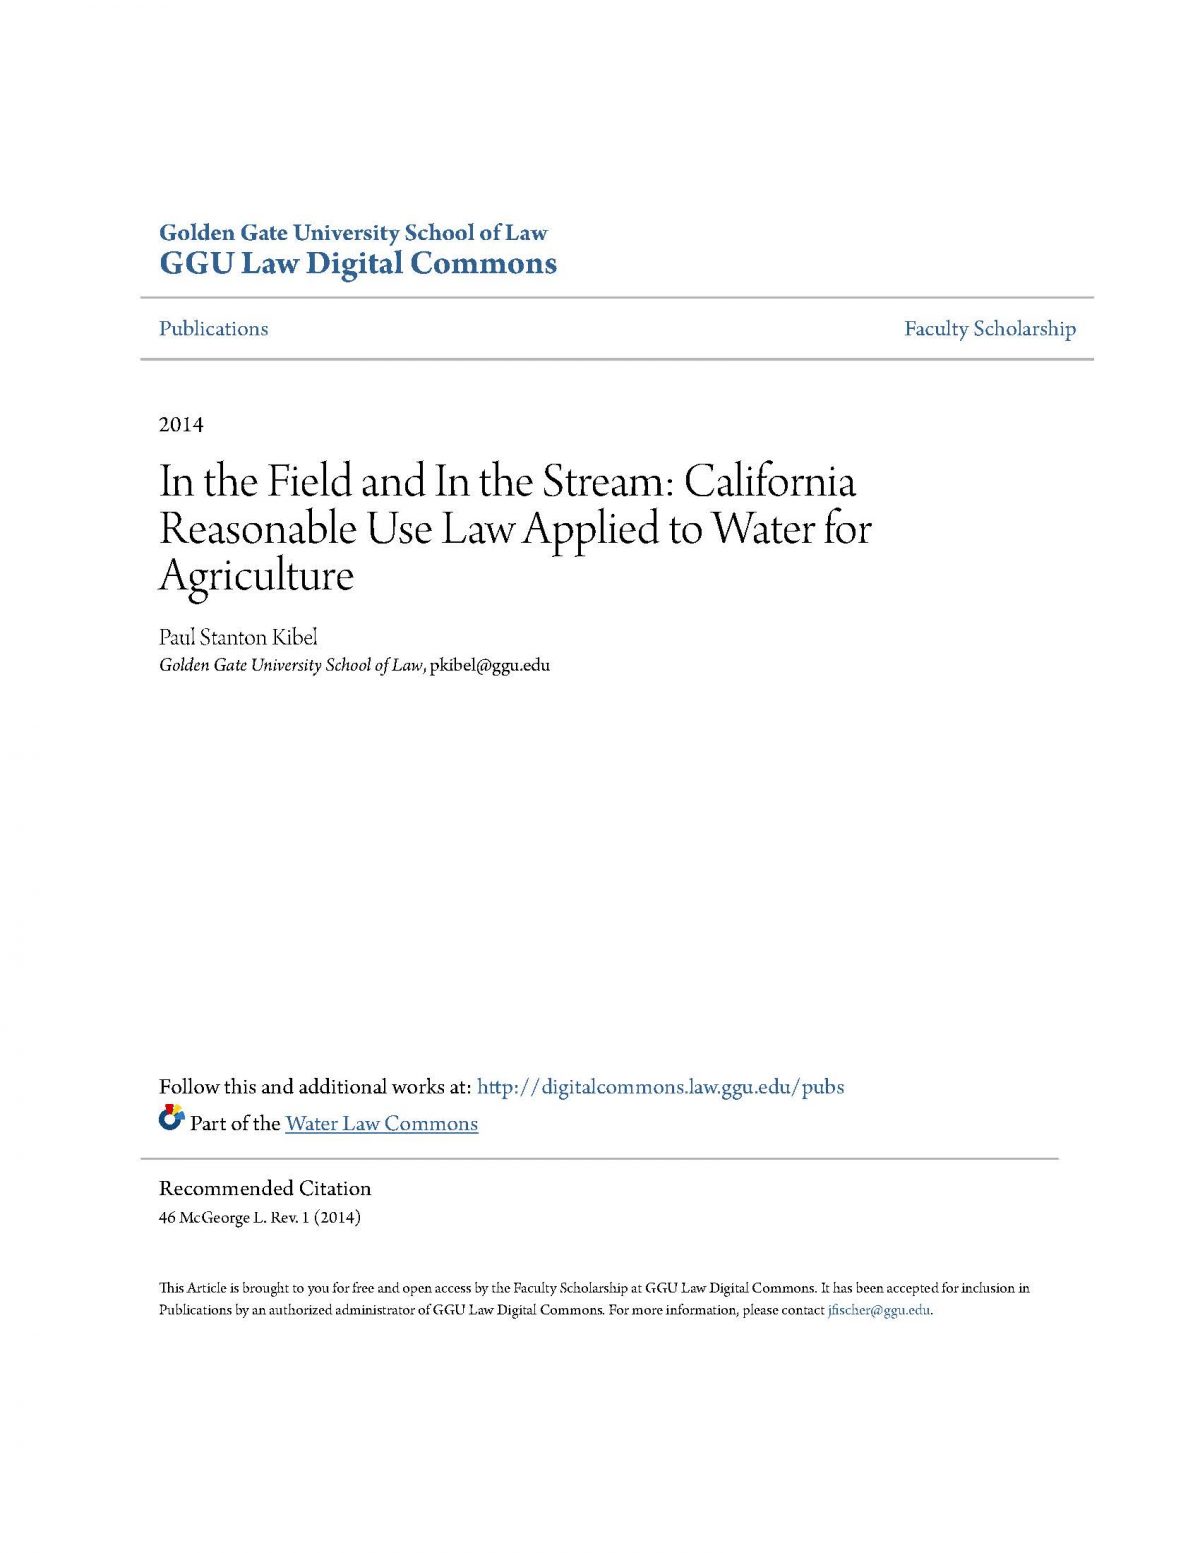 In the Field and In the Stream: California Reasonable Use Law Applied to Water for Agriculture